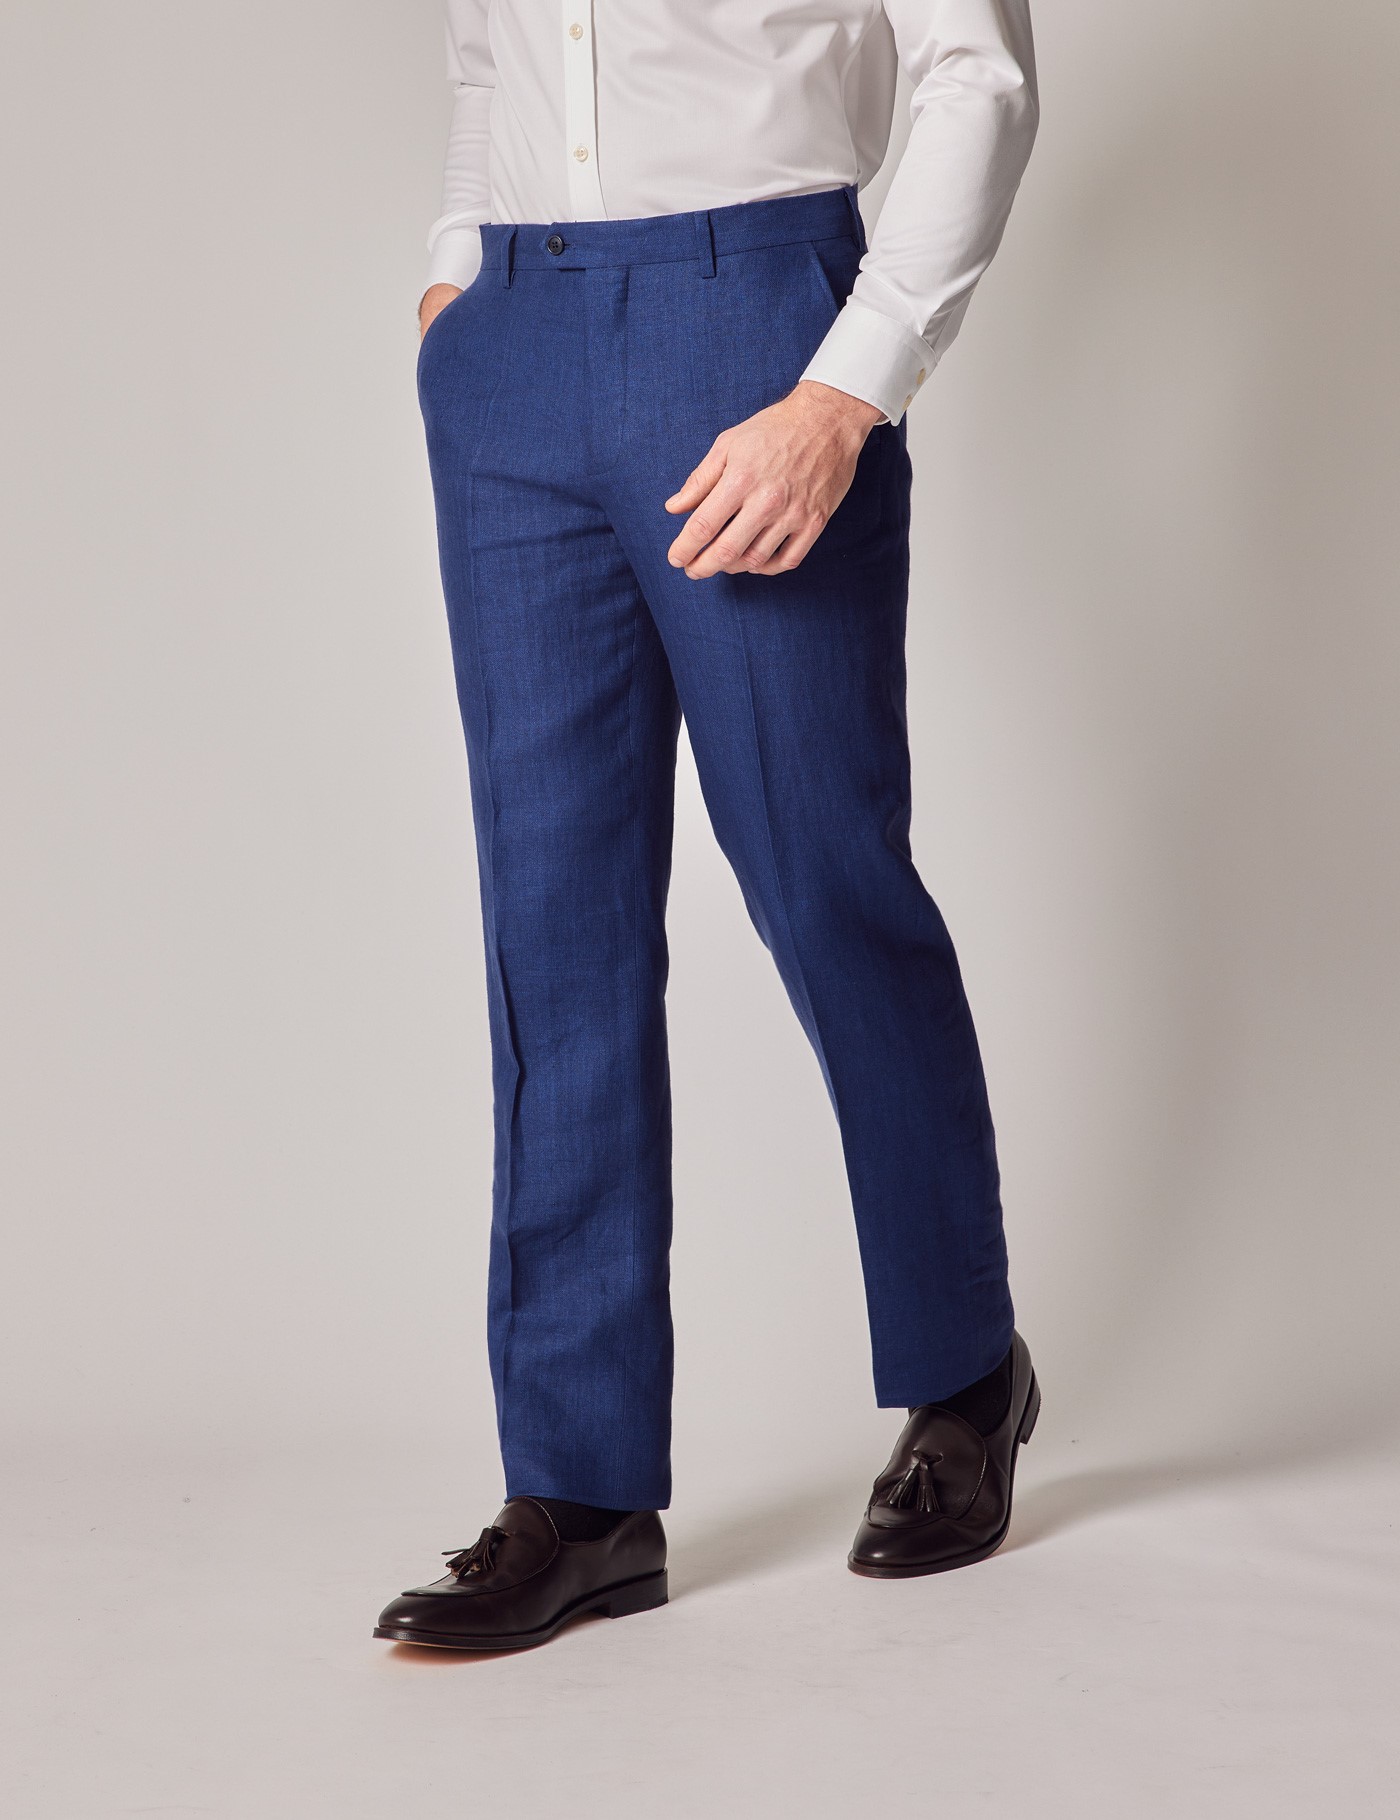 Plan C Trousers in Royal Blue – Hampden Clothing